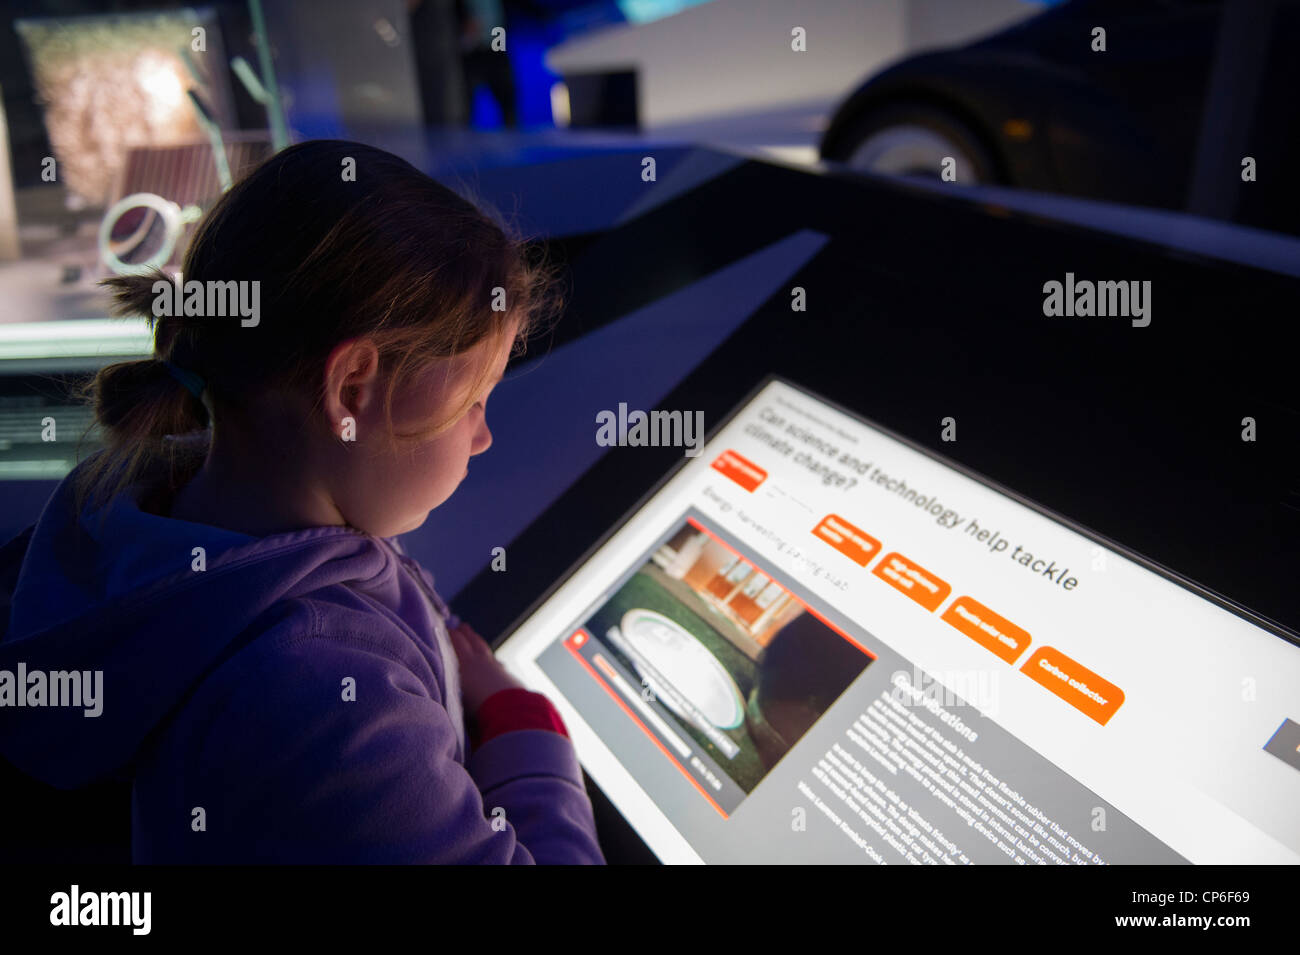 A young girl reading an interactive exhibit on climate change in the Science Museum in London. Stock Photo